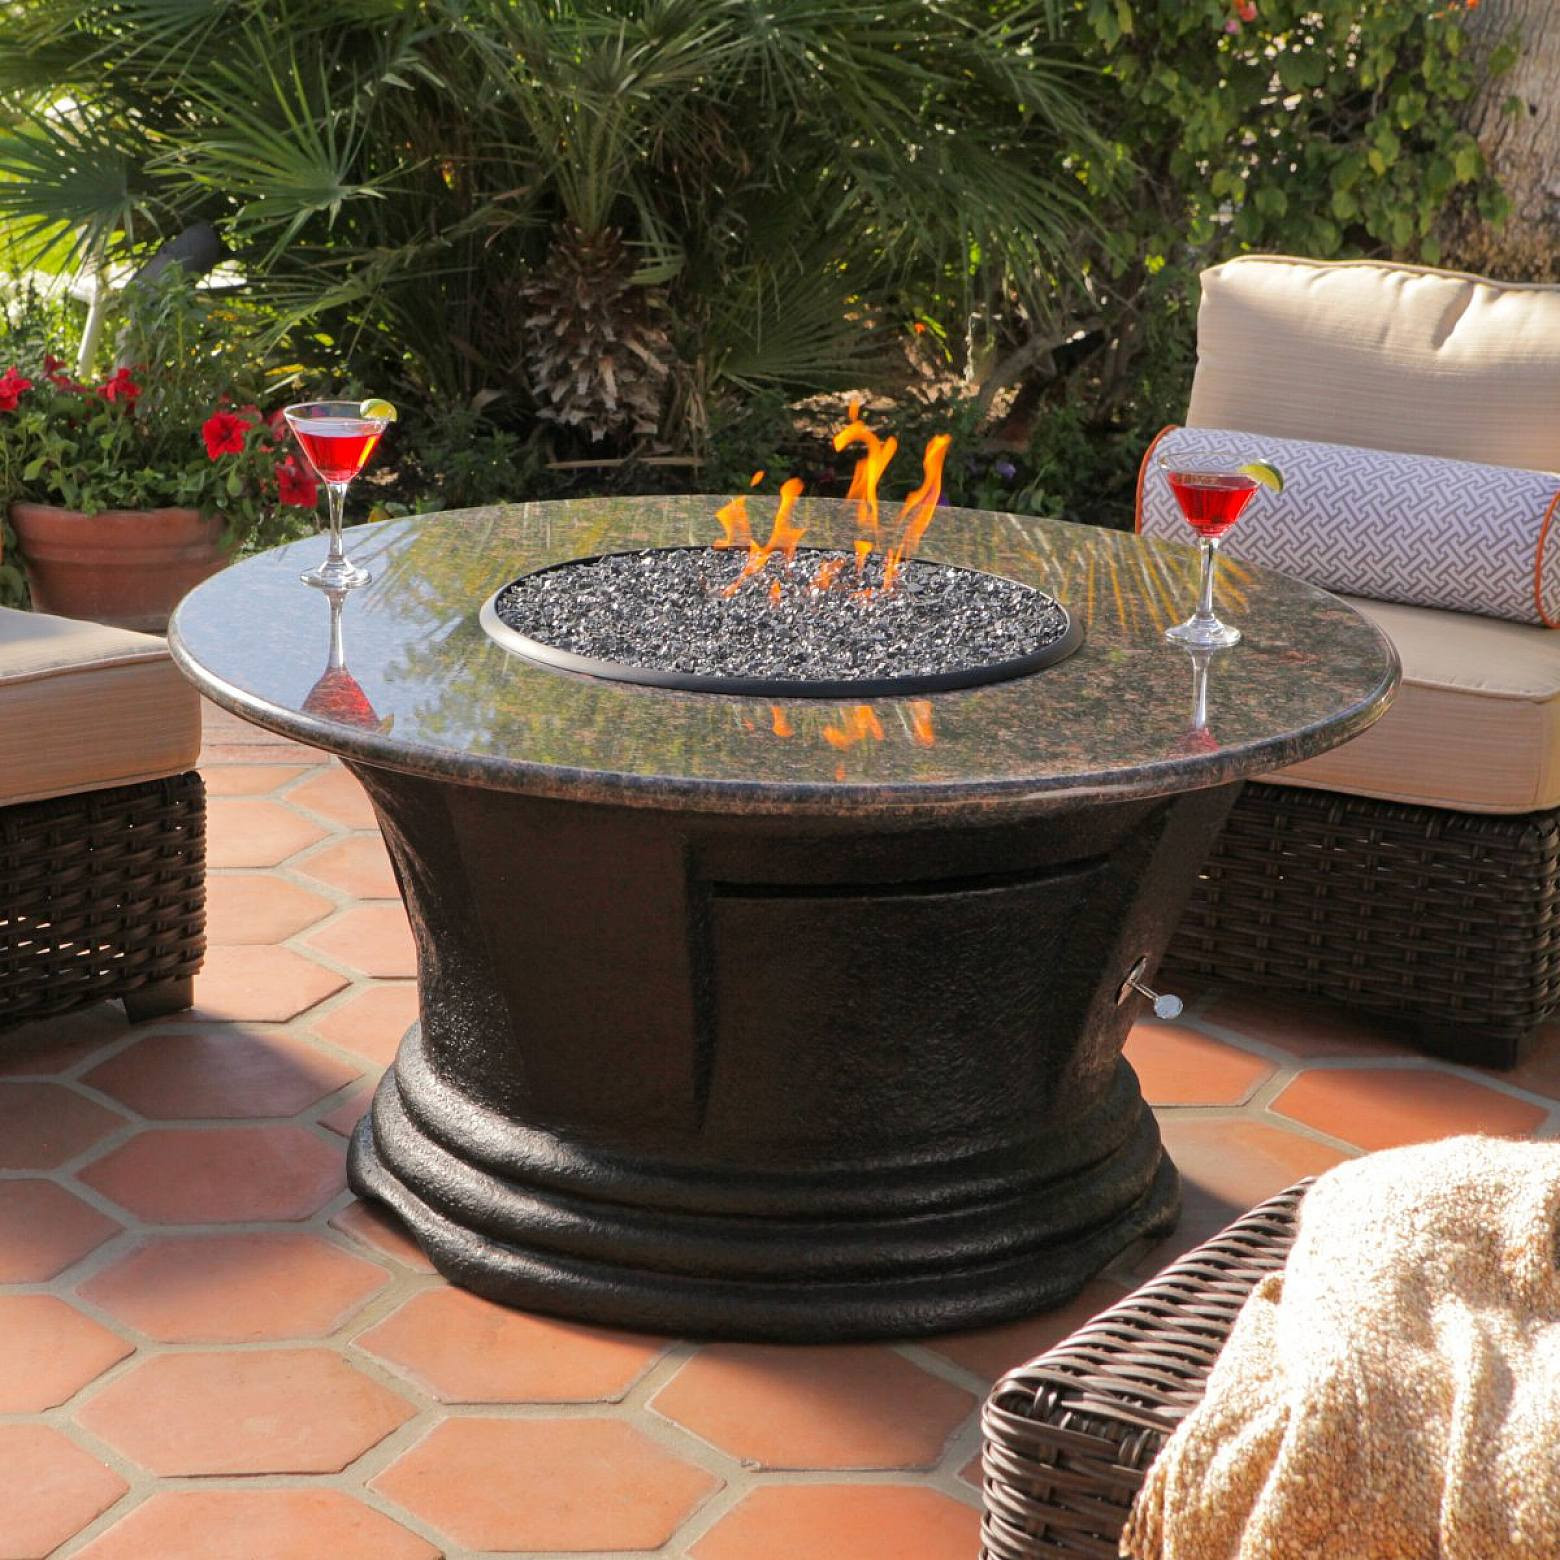 Indoor Fire Pit Coffee Table
 Cheap Indoor Propane Fire Pit